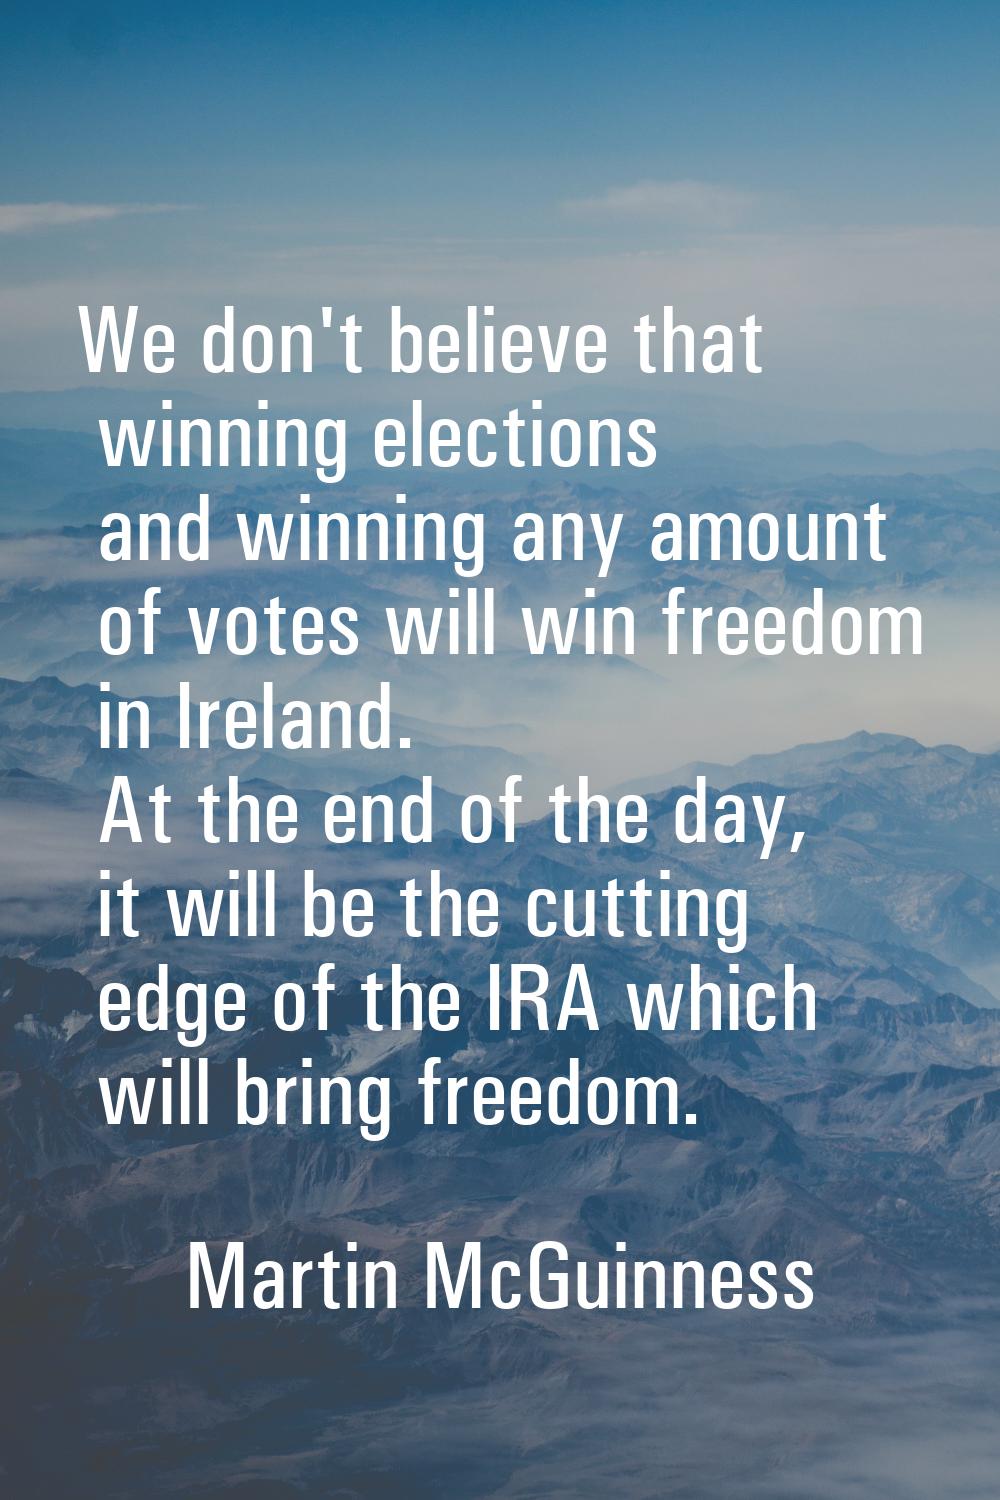 We don't believe that winning elections and winning any amount of votes will win freedom in Ireland